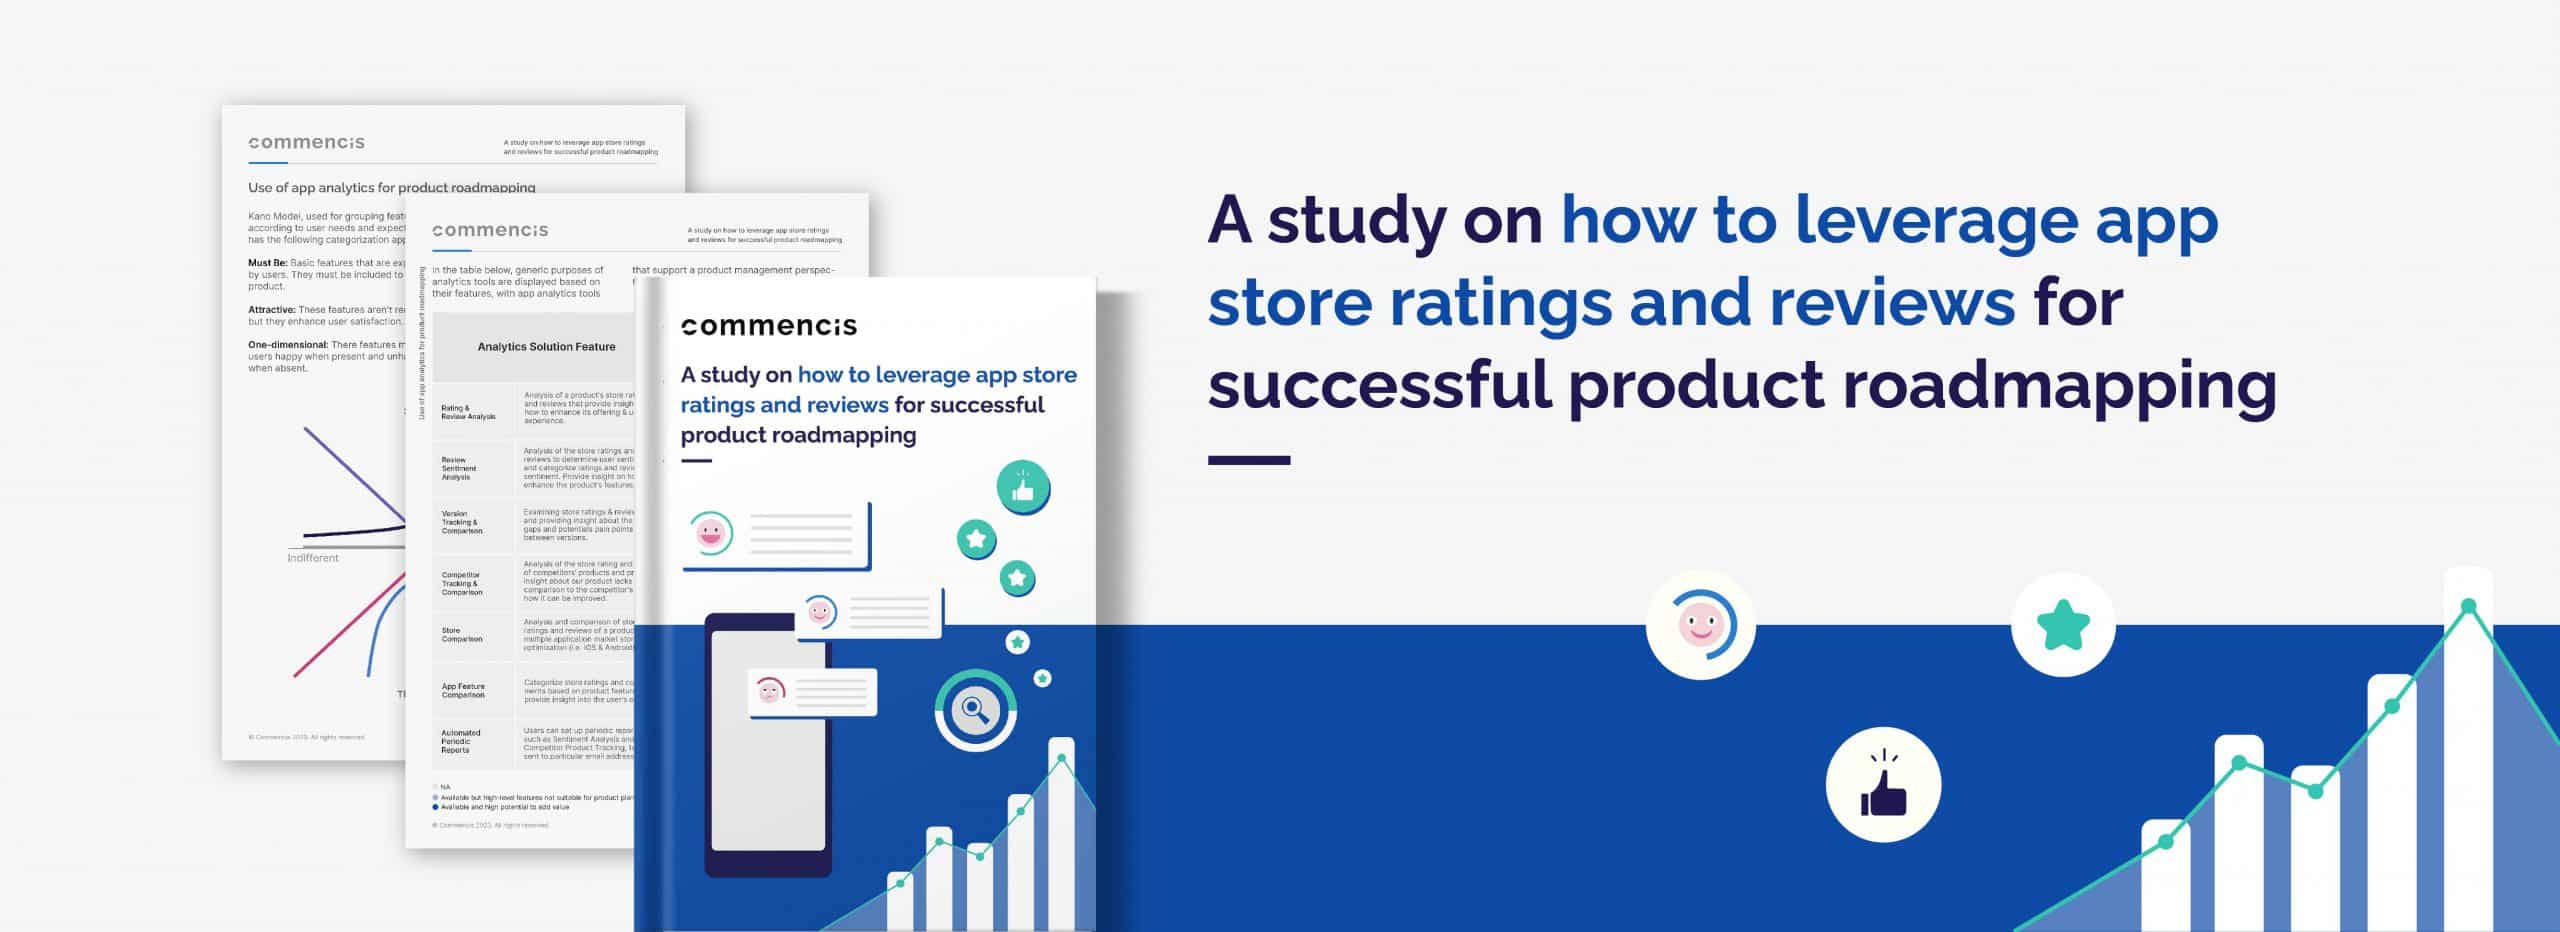 A study on how to leverage app store ratings and reviews for successful product roadmapping